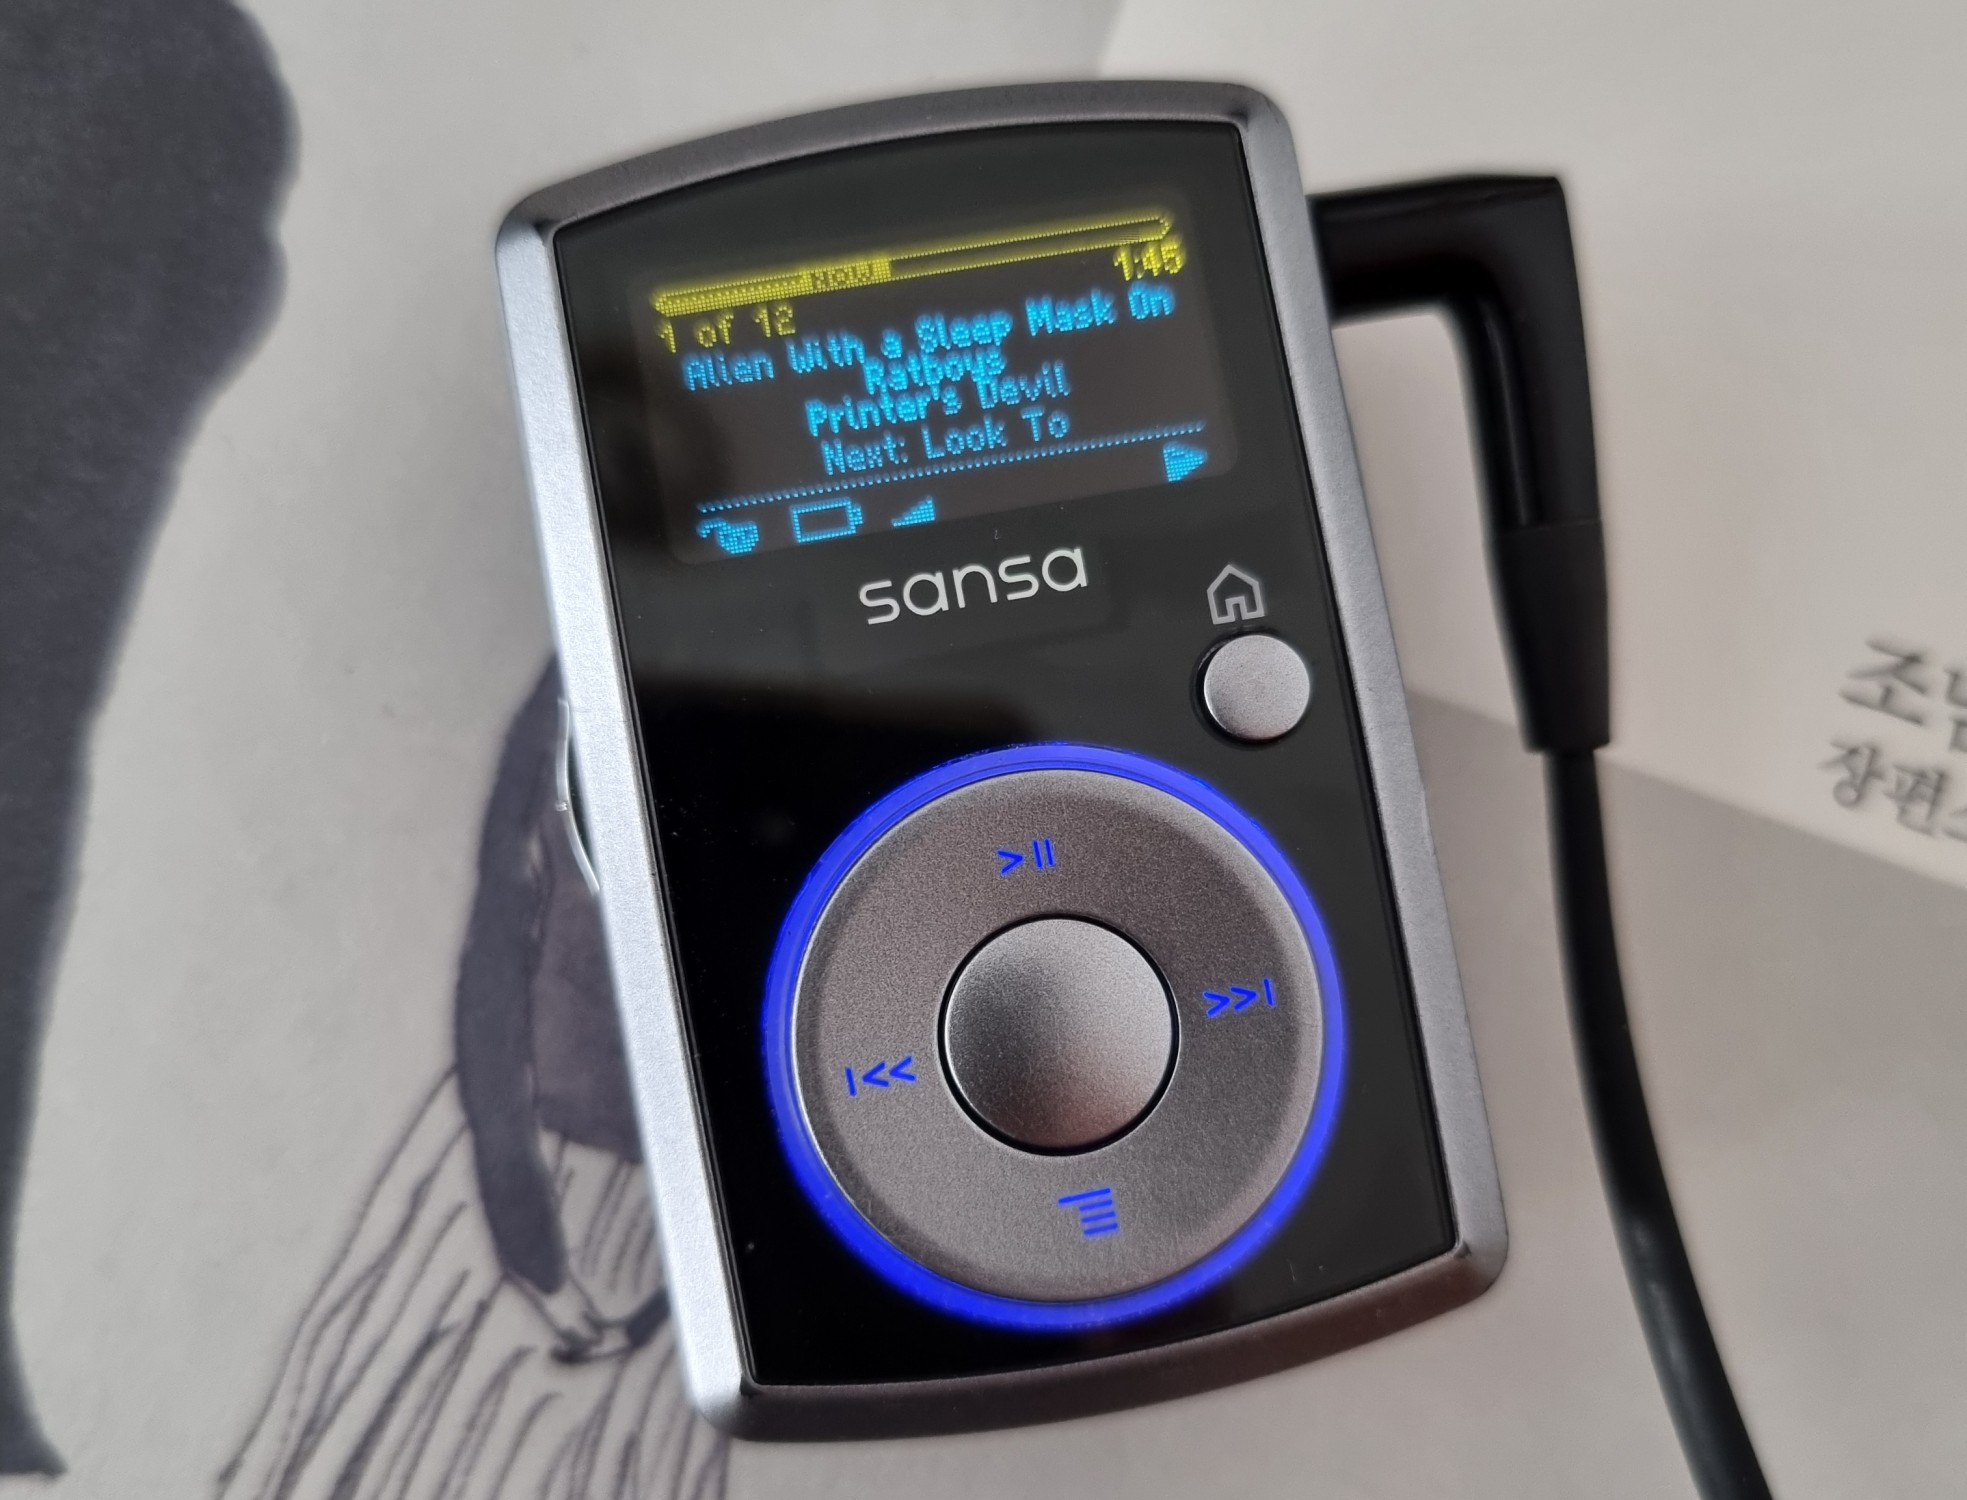 An image of an Obama-era Sansa clip (released in late 2007, probably manufactured later) running the Rockbox custom firmware